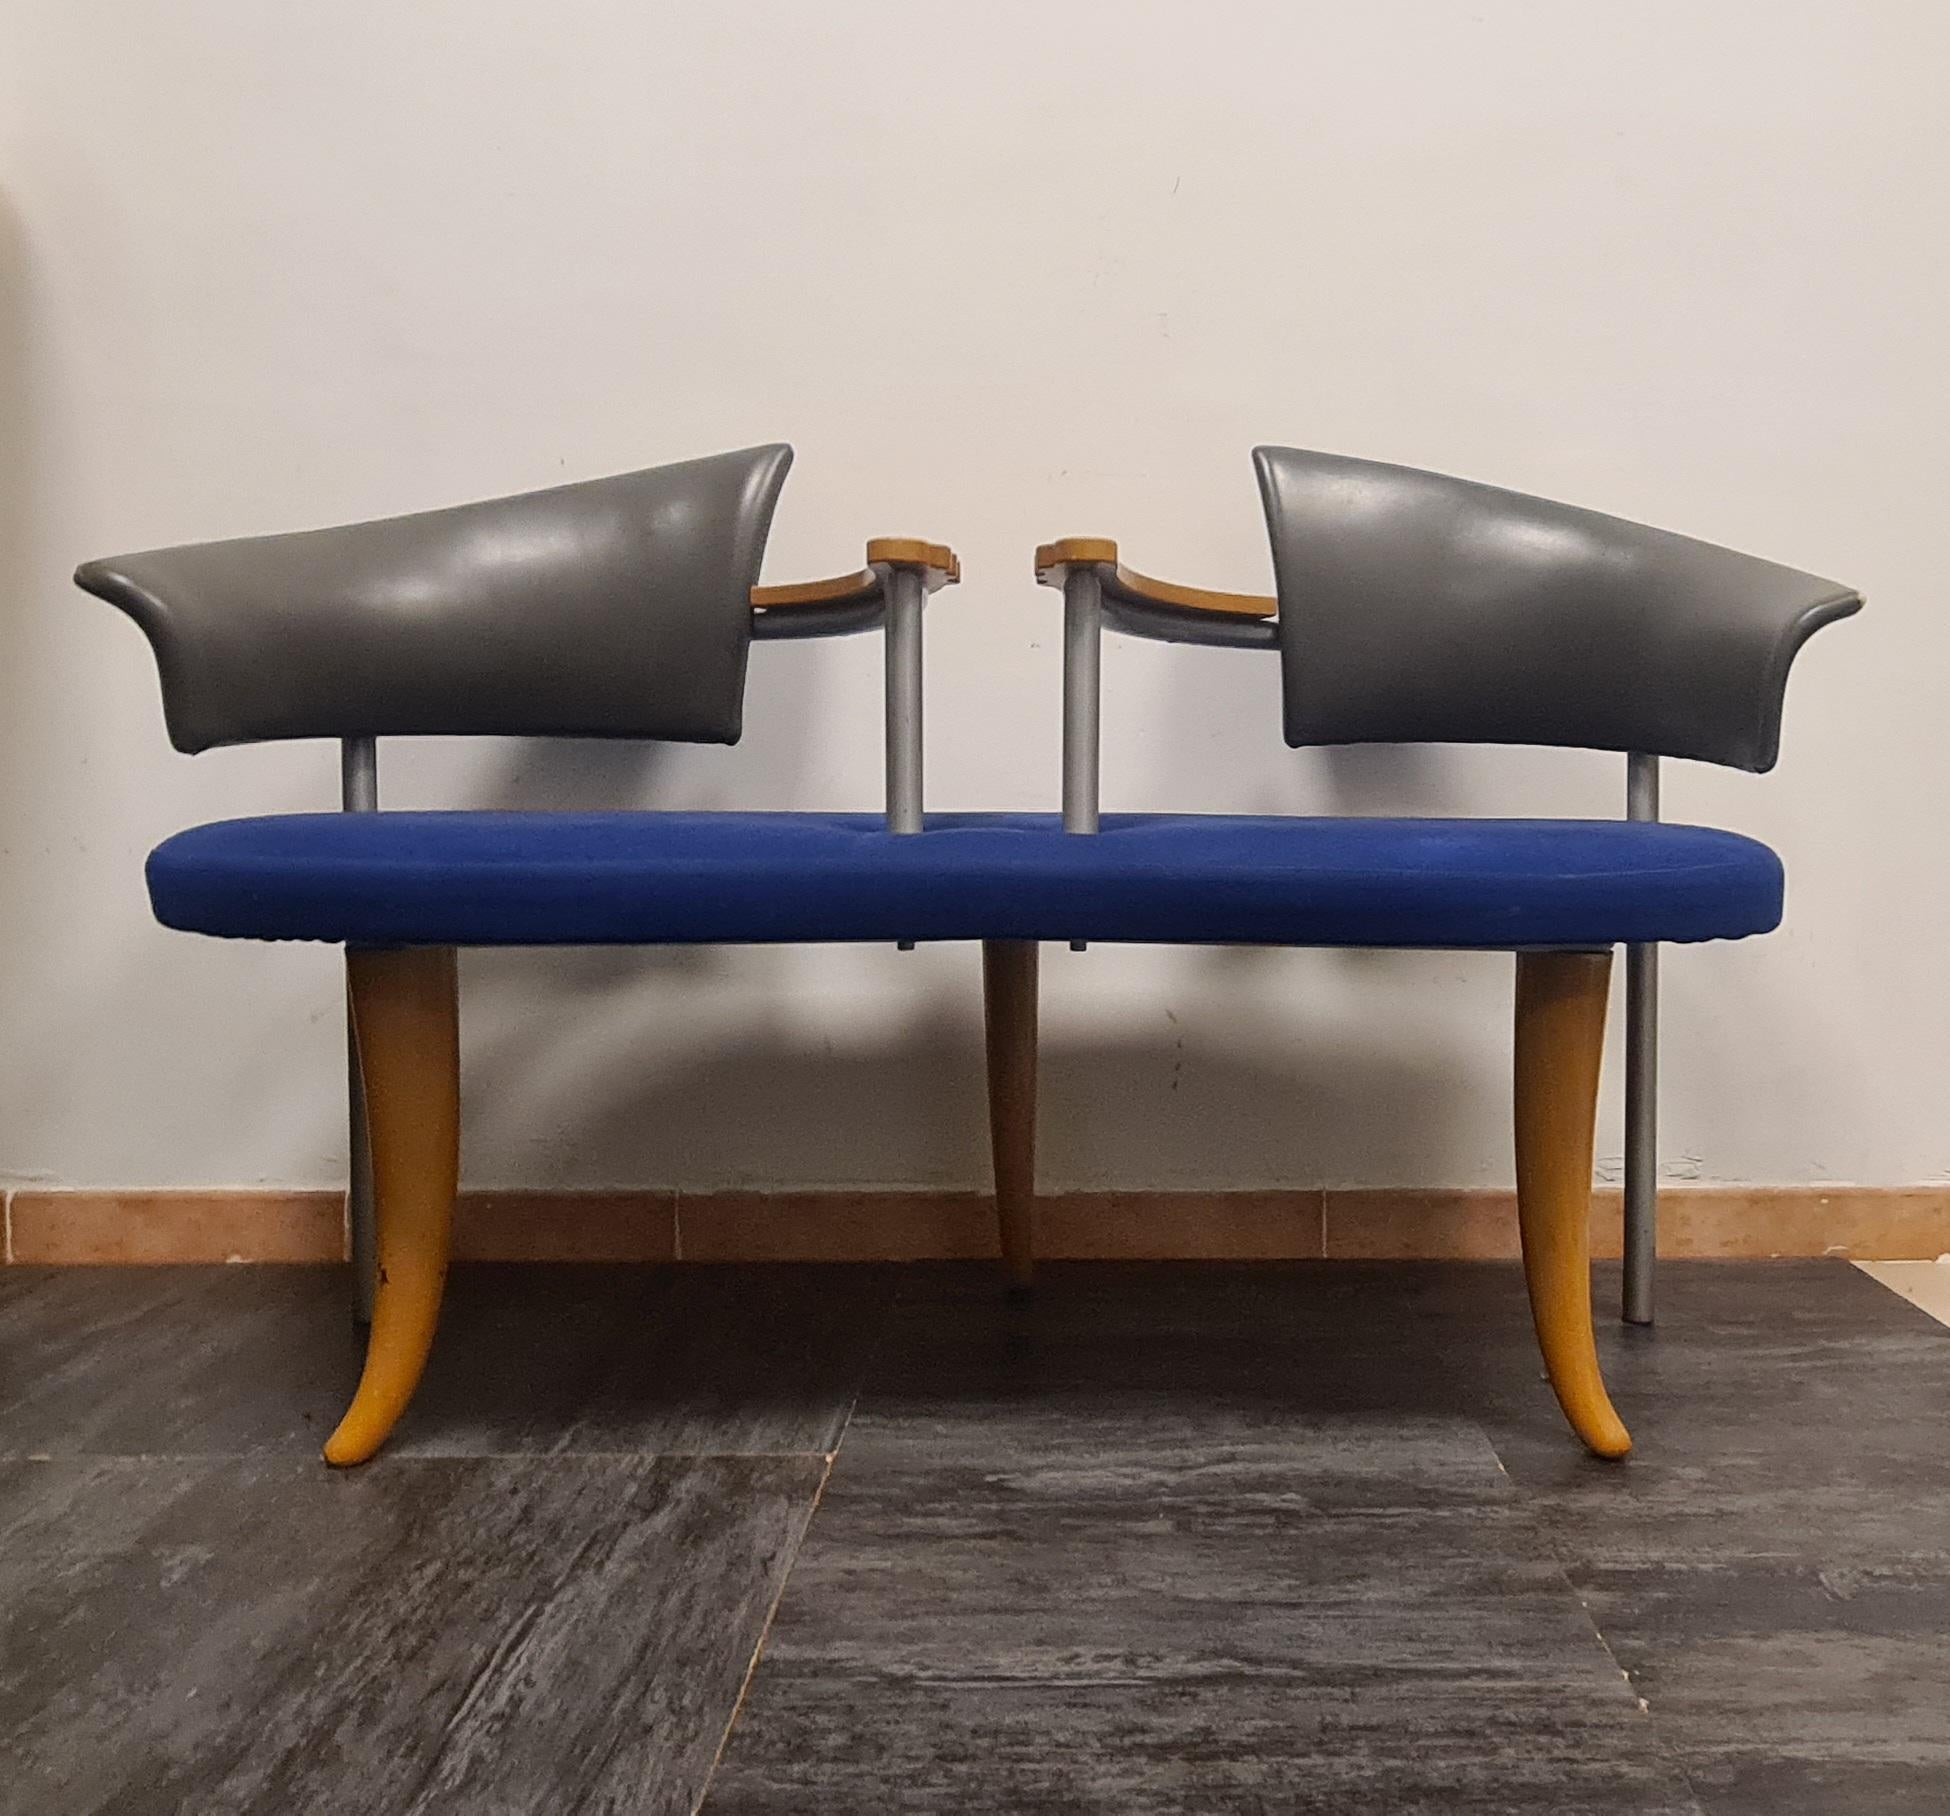 Two-seater sofa by designer Burkhard Vogtherr from the Solo series designed for Arflex in 1991.

Cute and unconventional two-seater sofa made of metal wood and leather in the 1990s.

The eccentrically styled sofa has a postmodern style reminiscent